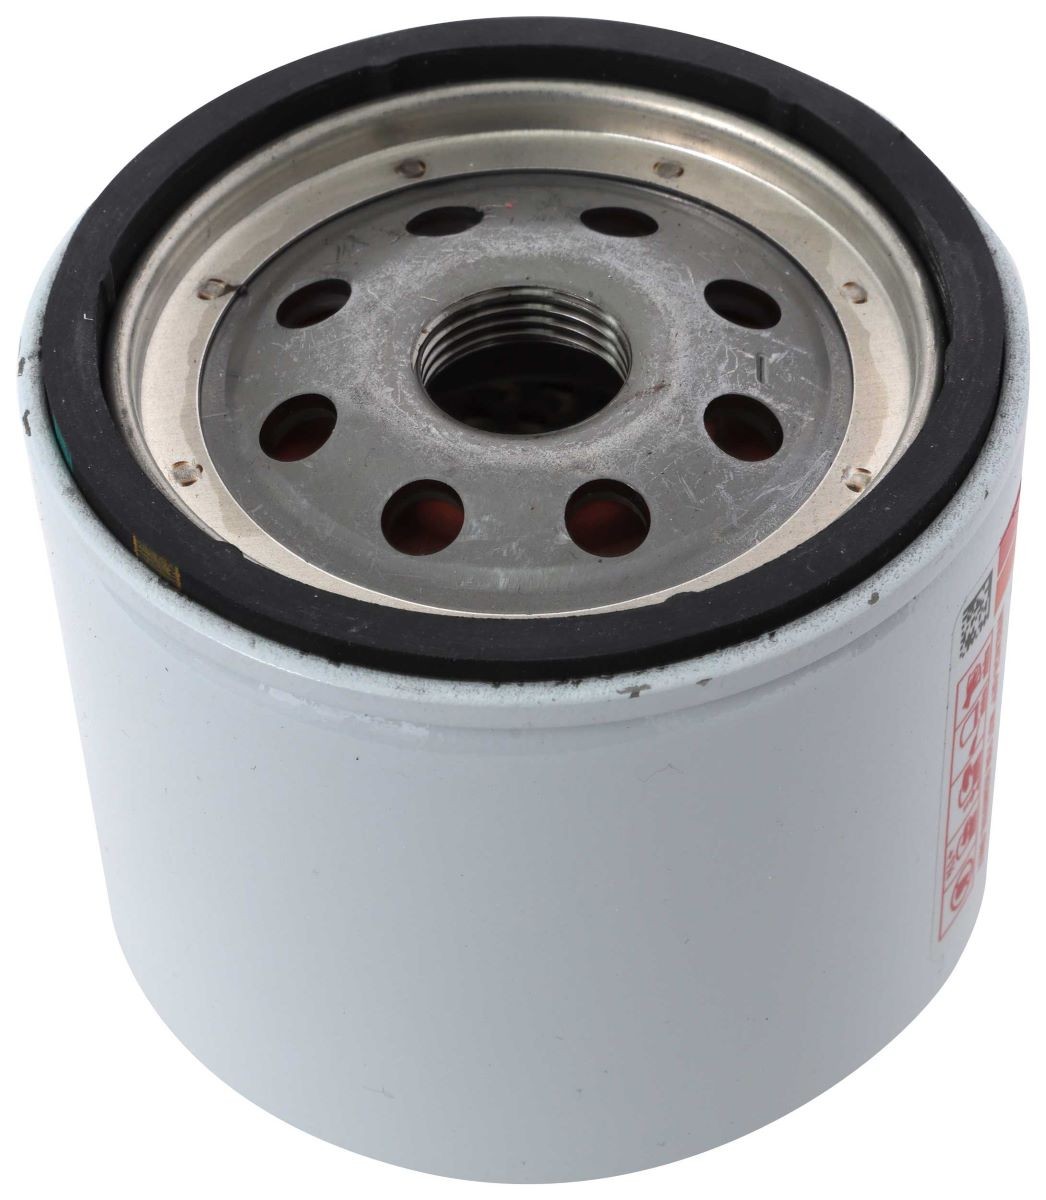 K&N Filters Oil filter HP-1011 for CHEVROLET AVALANCHE, SUBURBAN